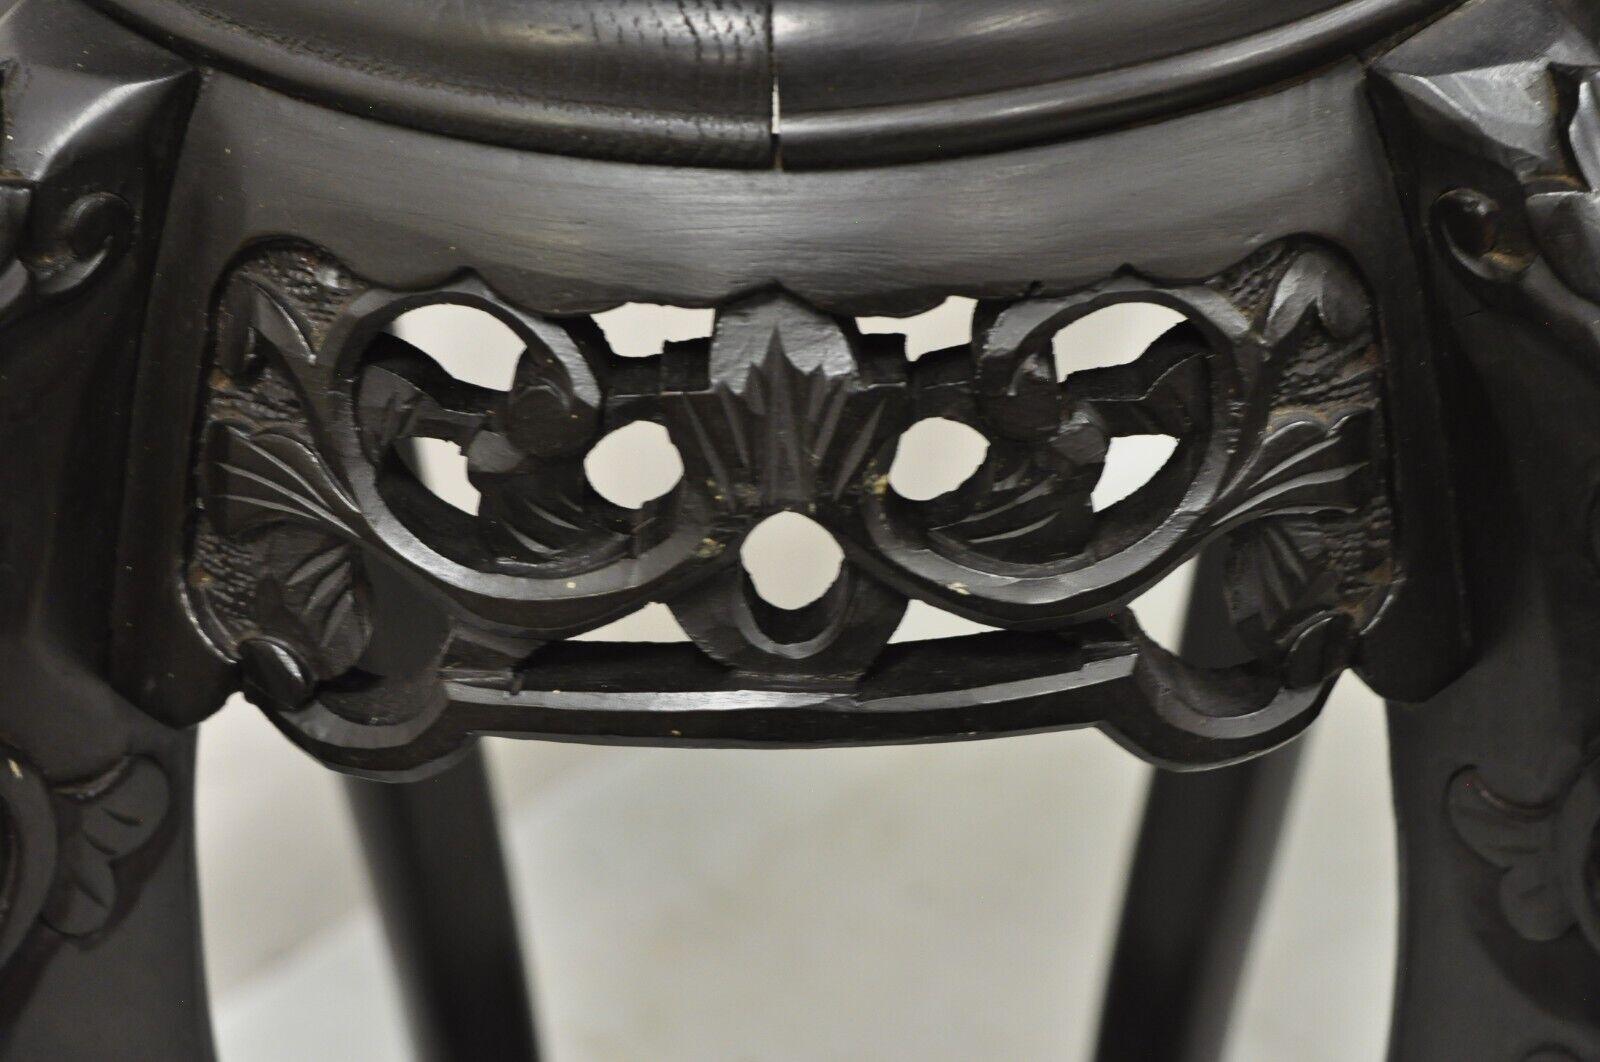 Japanese Carved Wood Black Ebonized Plant Stand Side Table Lacquer Top In Good Condition For Sale In Philadelphia, PA